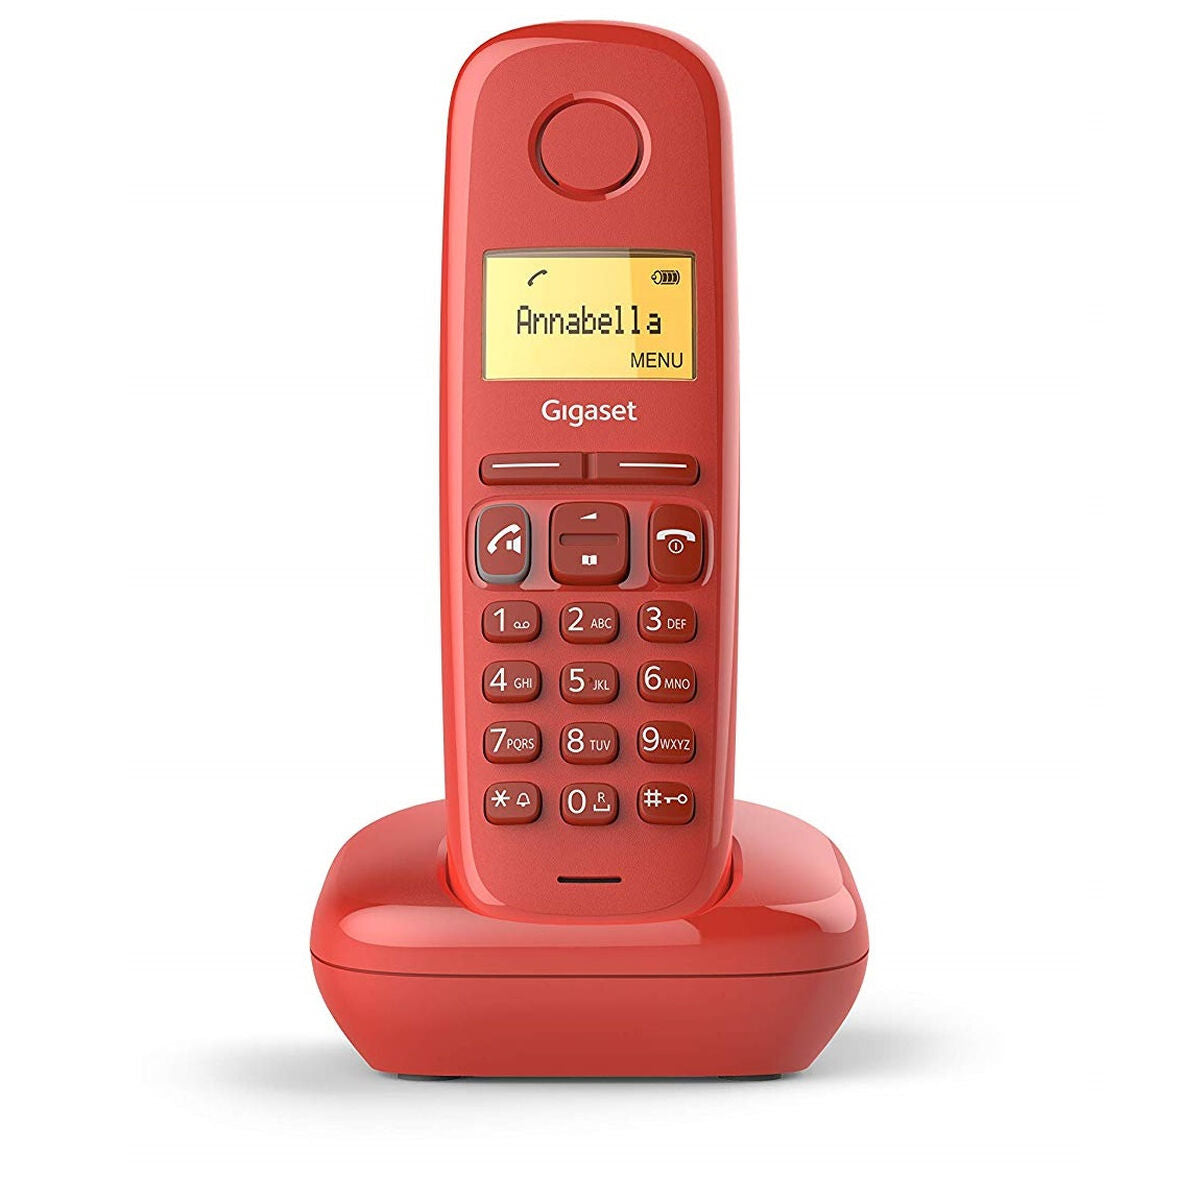 Wireless Phone Gigaset A270 Red, Gigaset, Electronics, Landline telephones and accessories, wireless-phone-gigaset-a270-red, Brand_Gigaset, category-reference-2609, category-reference-2617, category-reference-2619, category-reference-t-18372, category-reference-t-18382, category-reference-t-19653, Condition_NEW, office, Price_20 - 50, telephones & tablets, Teleworking, RiotNook